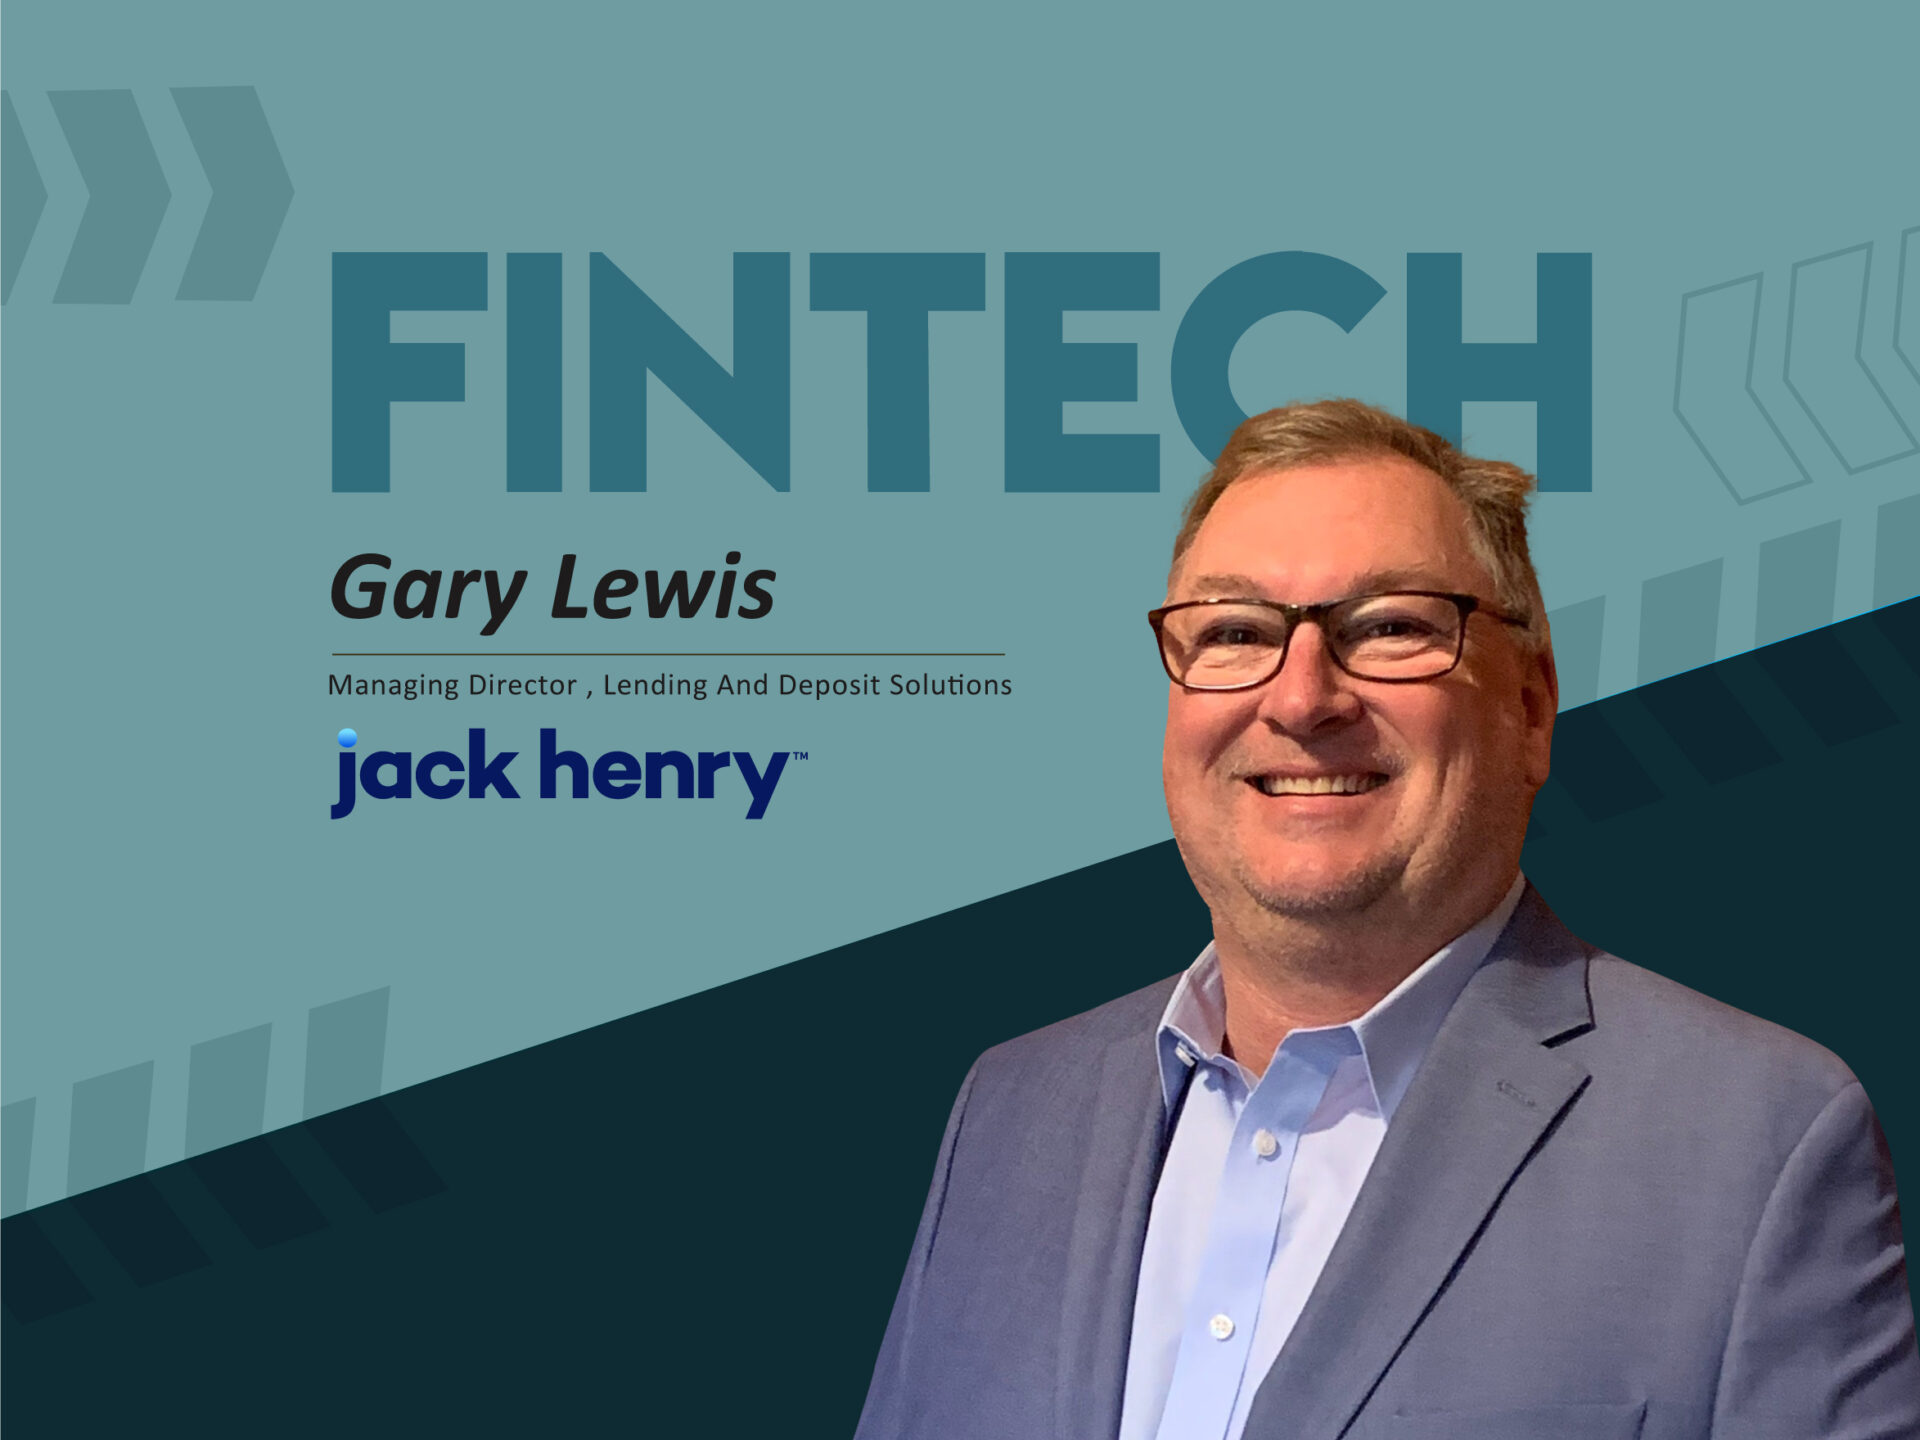 Global Fintech Interview with Gary Lewis, Managing Director of Lending & Deposit Solutions at Jack Henry